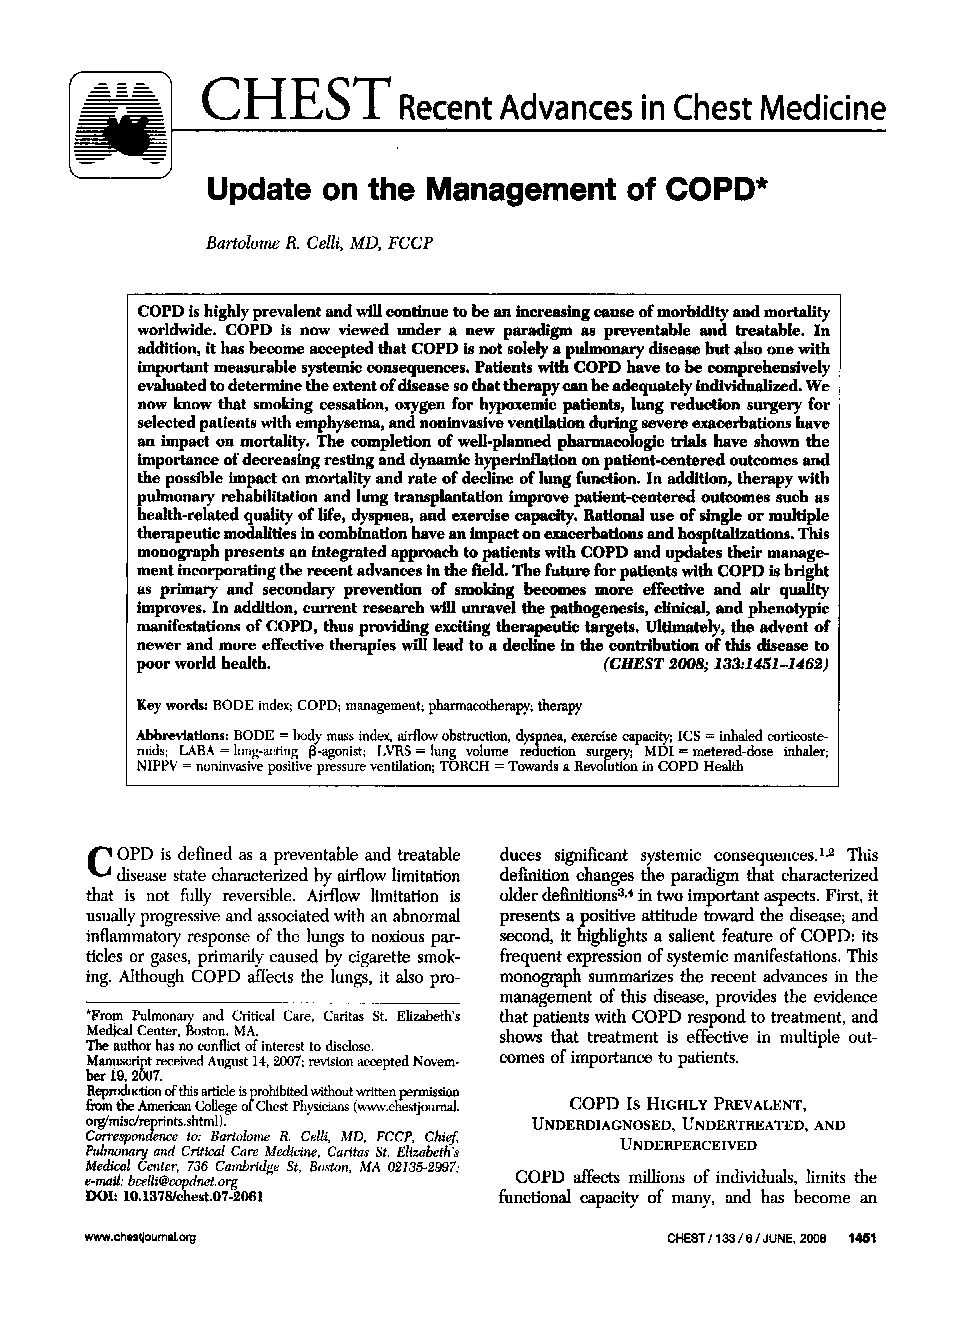 Update on the Management of COPD 